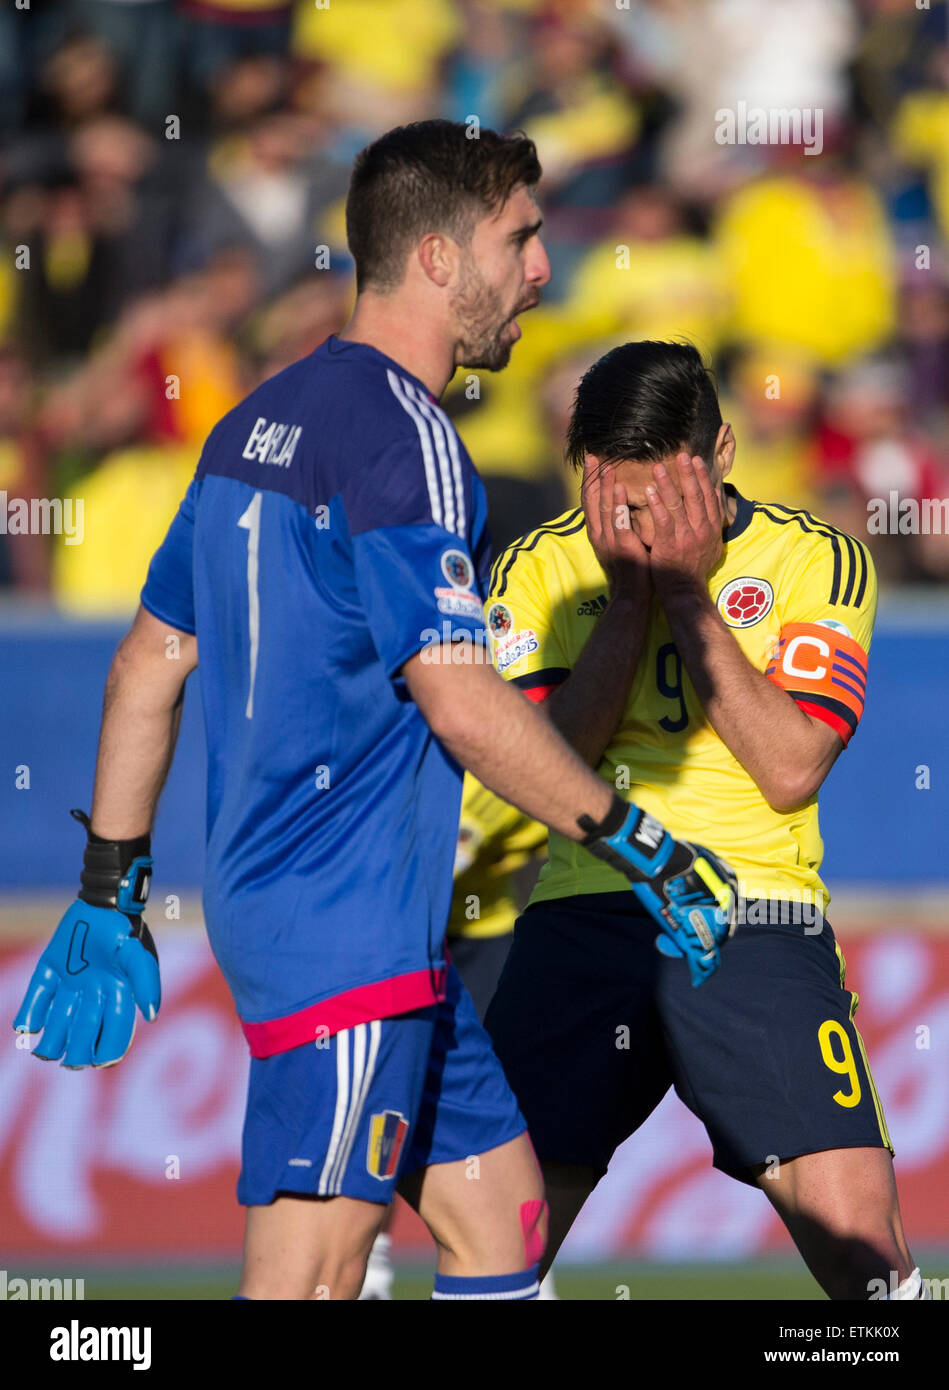 Rancagua, Chile. 14th June, 2015. Colombia's Radamel Falcao (R) reacts during a Group C match between Colombia and Venezuela at Copa America 2015 in Rancagua, Chile, June 14, 2015. Colombia lost the match 0-1. Credit:  Guillermo Arias/Xinhua/Alamy Live News Stock Photo